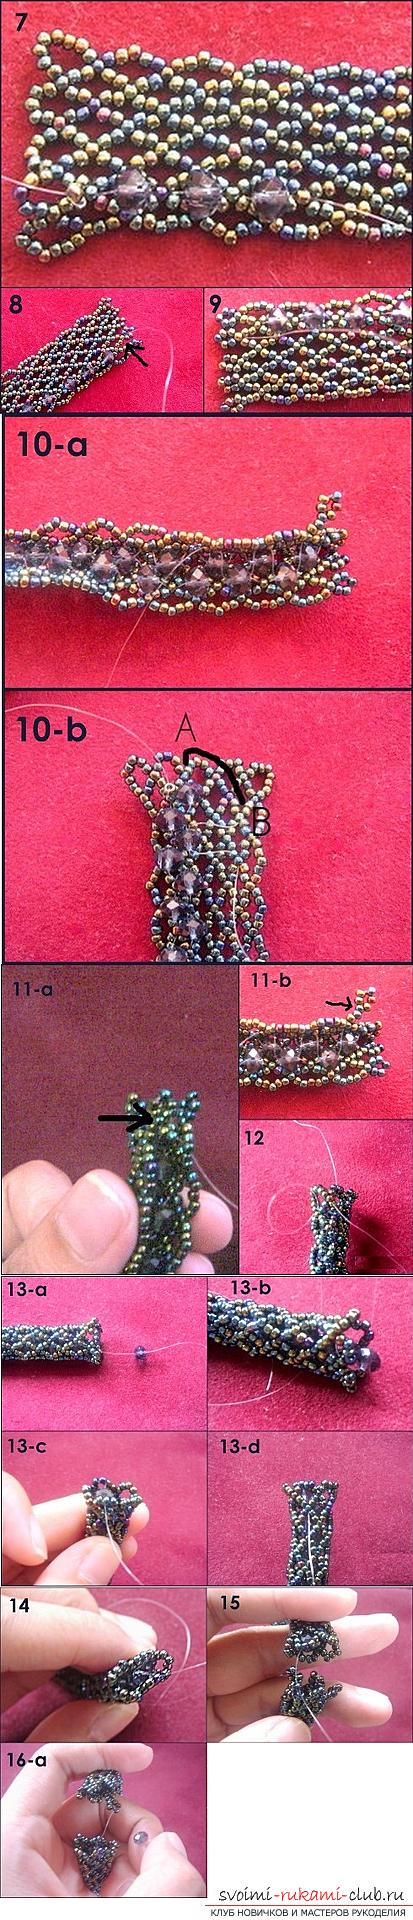 How to weave beautiful beads, detailed instructions, description and step-by-step photos for beginners in beadwork. Photo Number 11